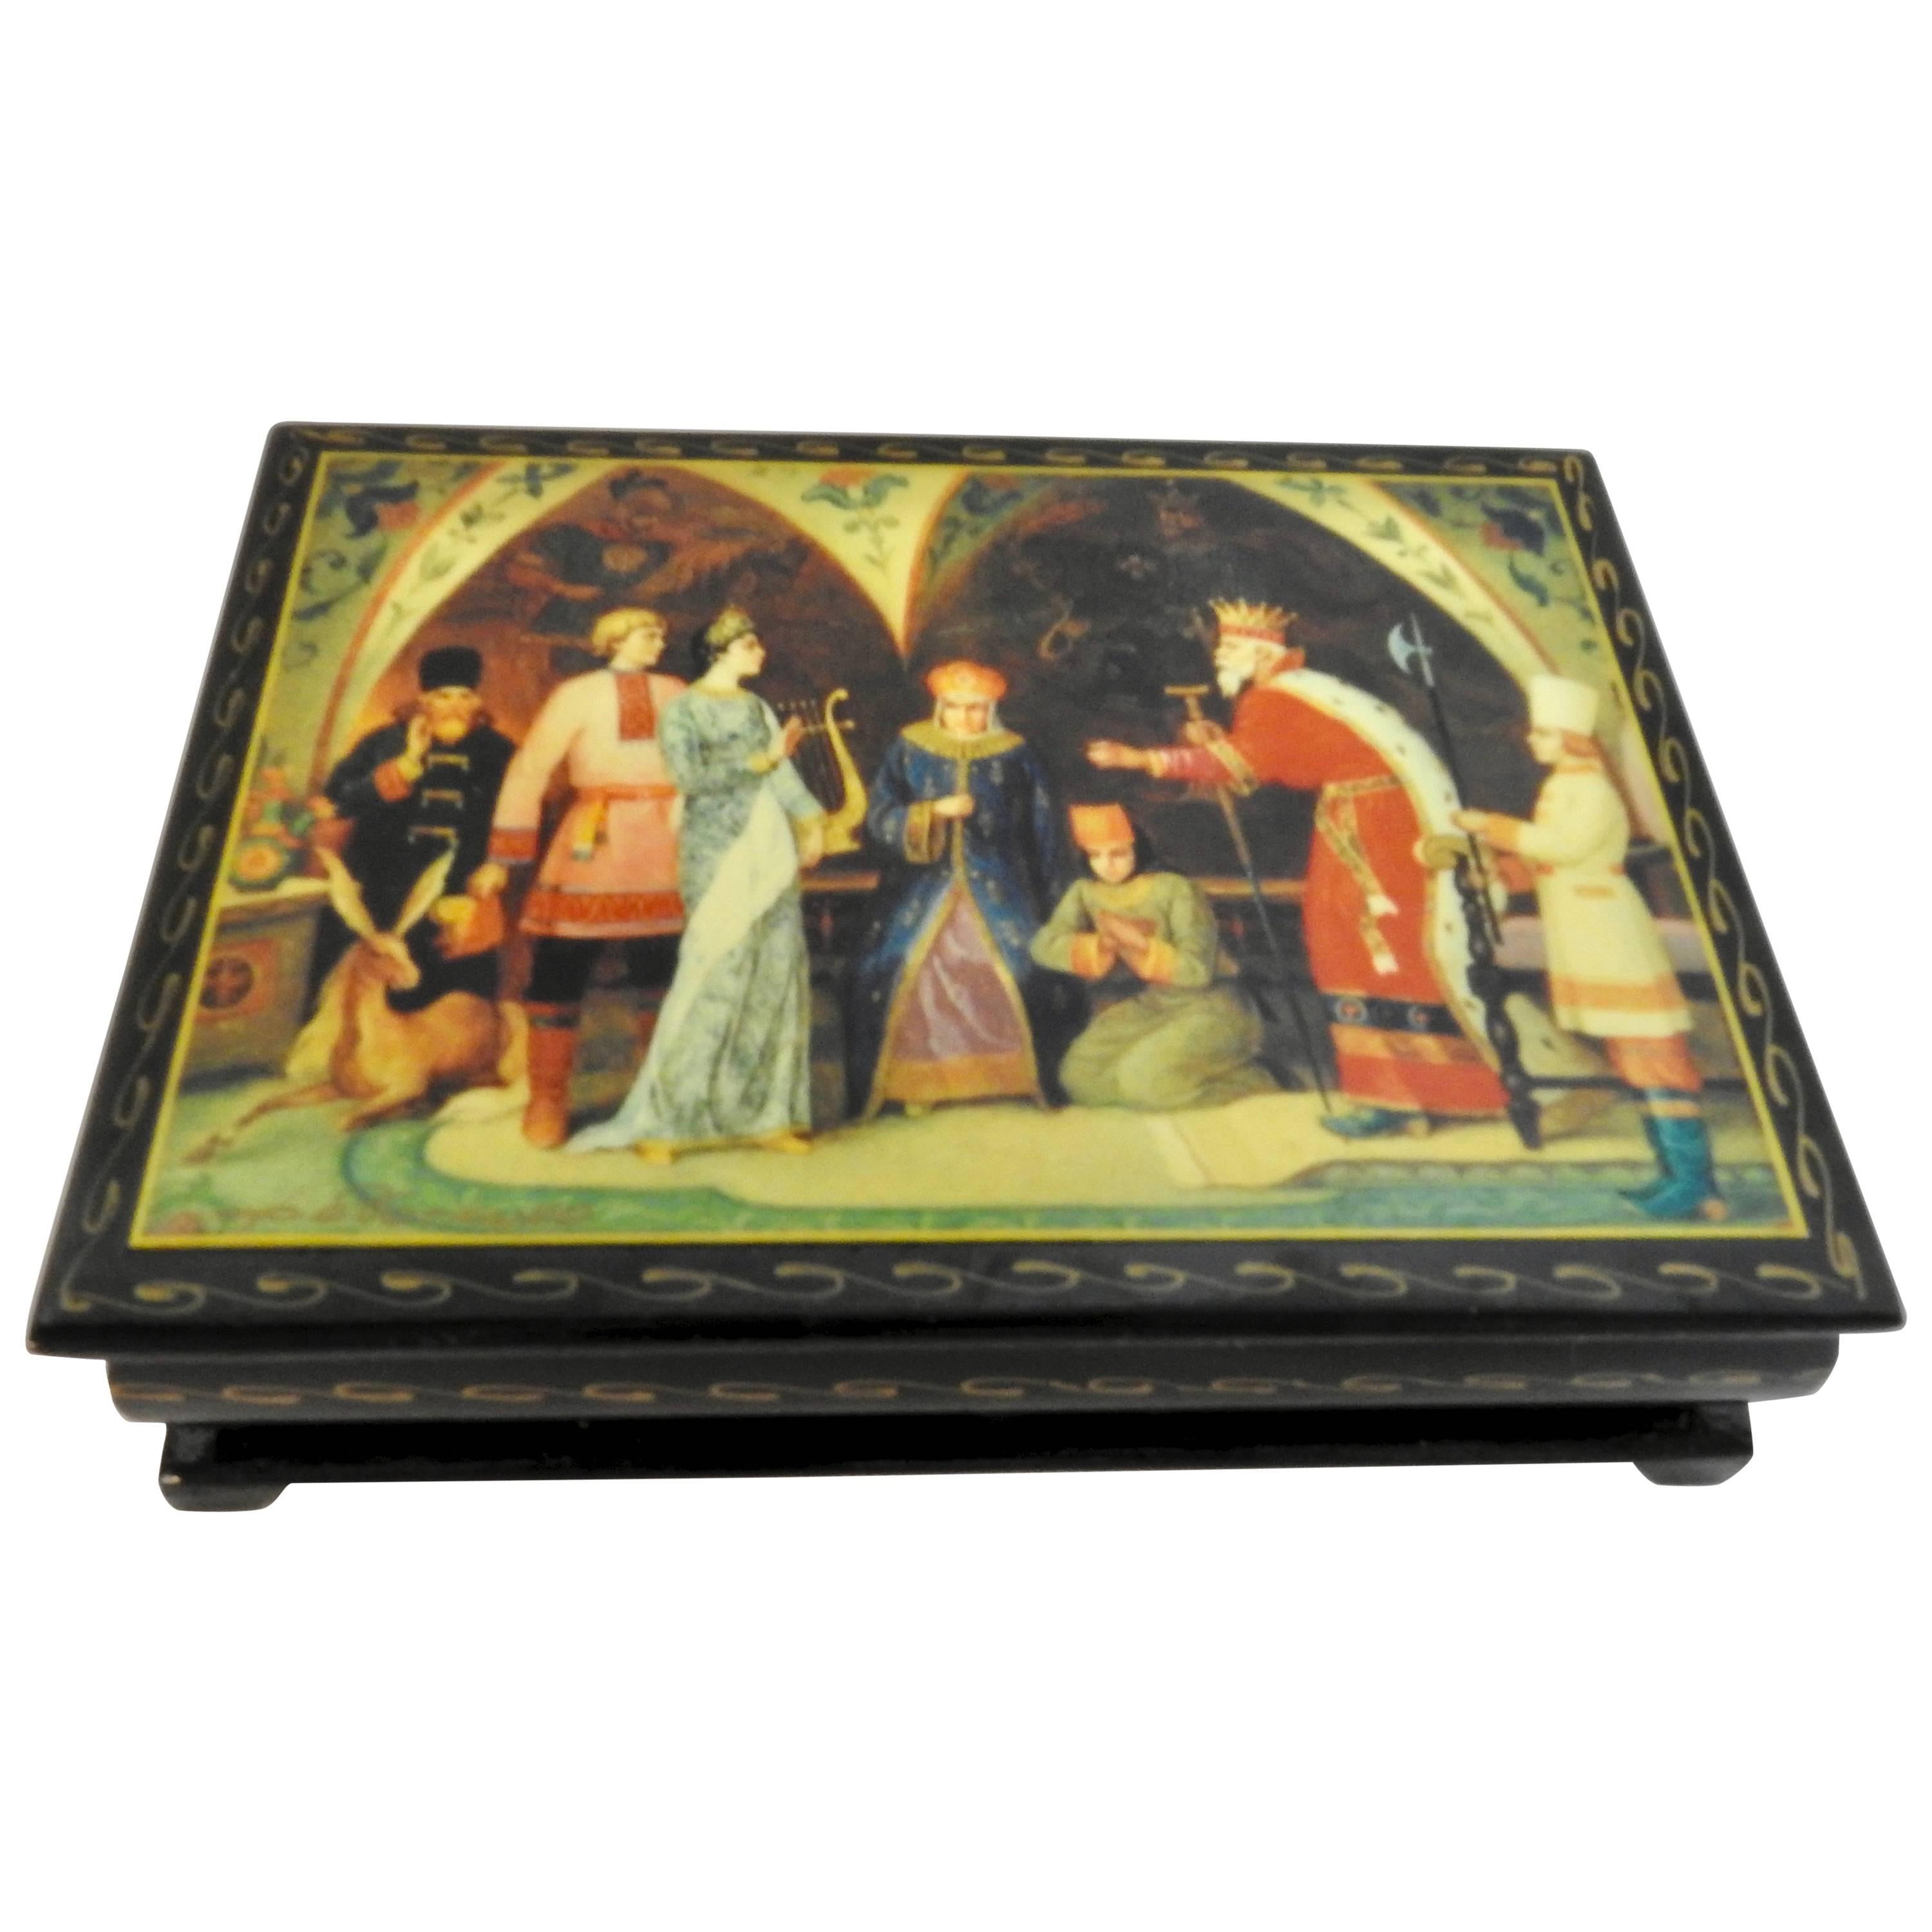 Russian Lacquer Box with Scene of Royalty at the Kremlin